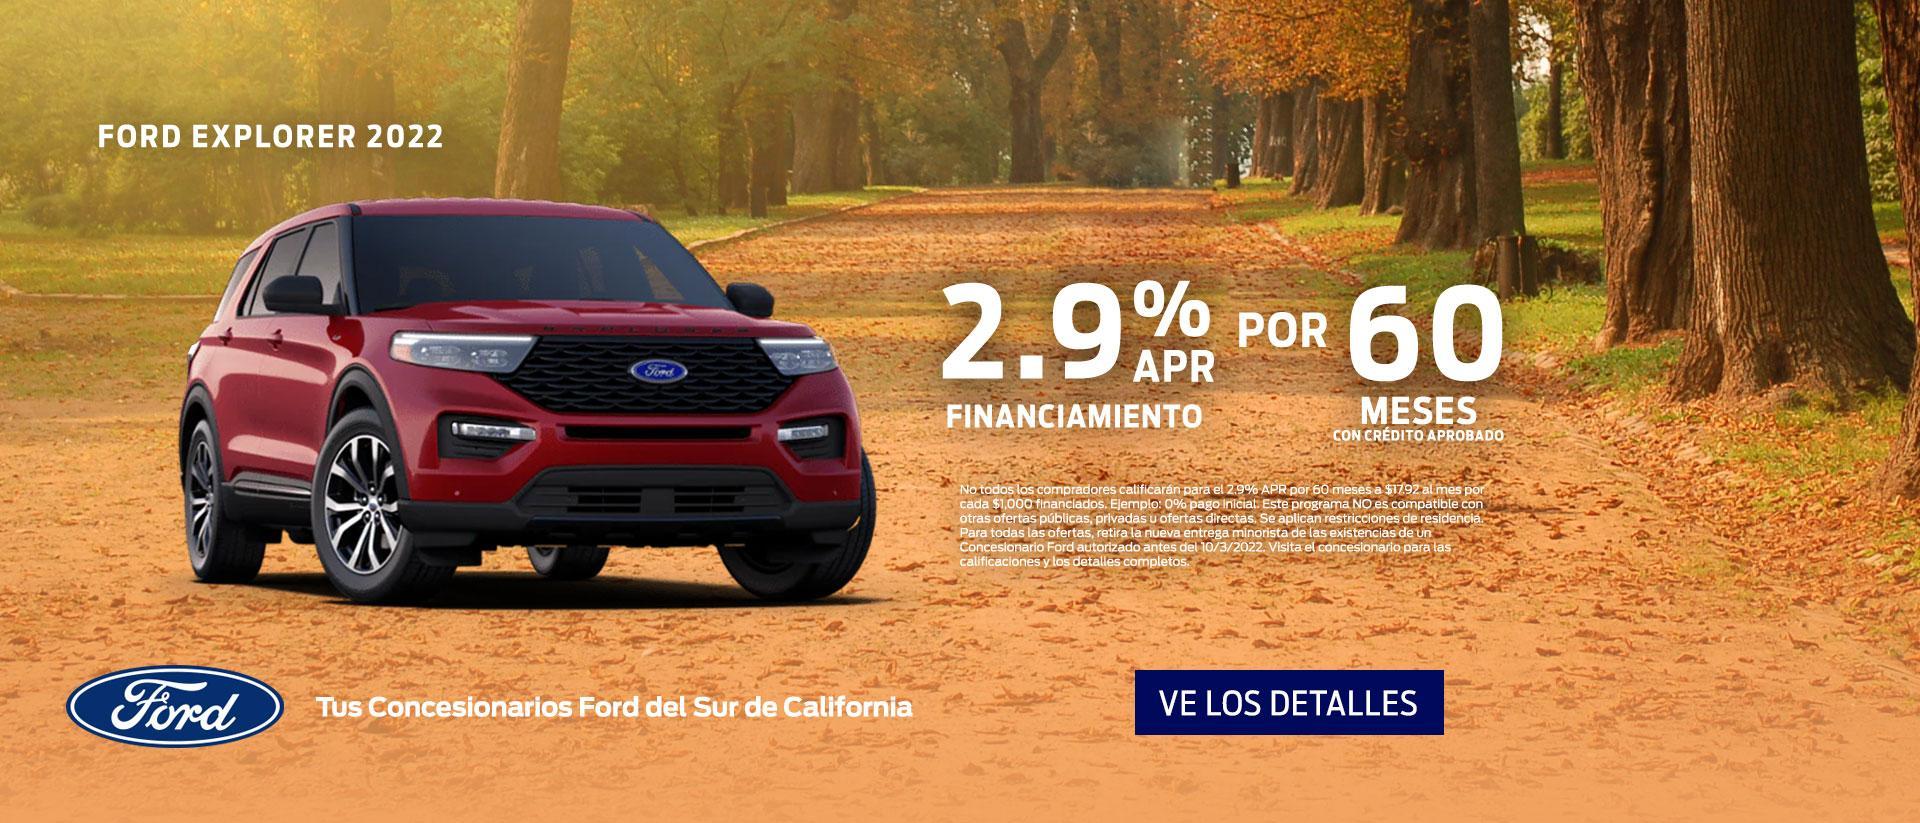 Explorer Offers | Southern California Ford Dealers